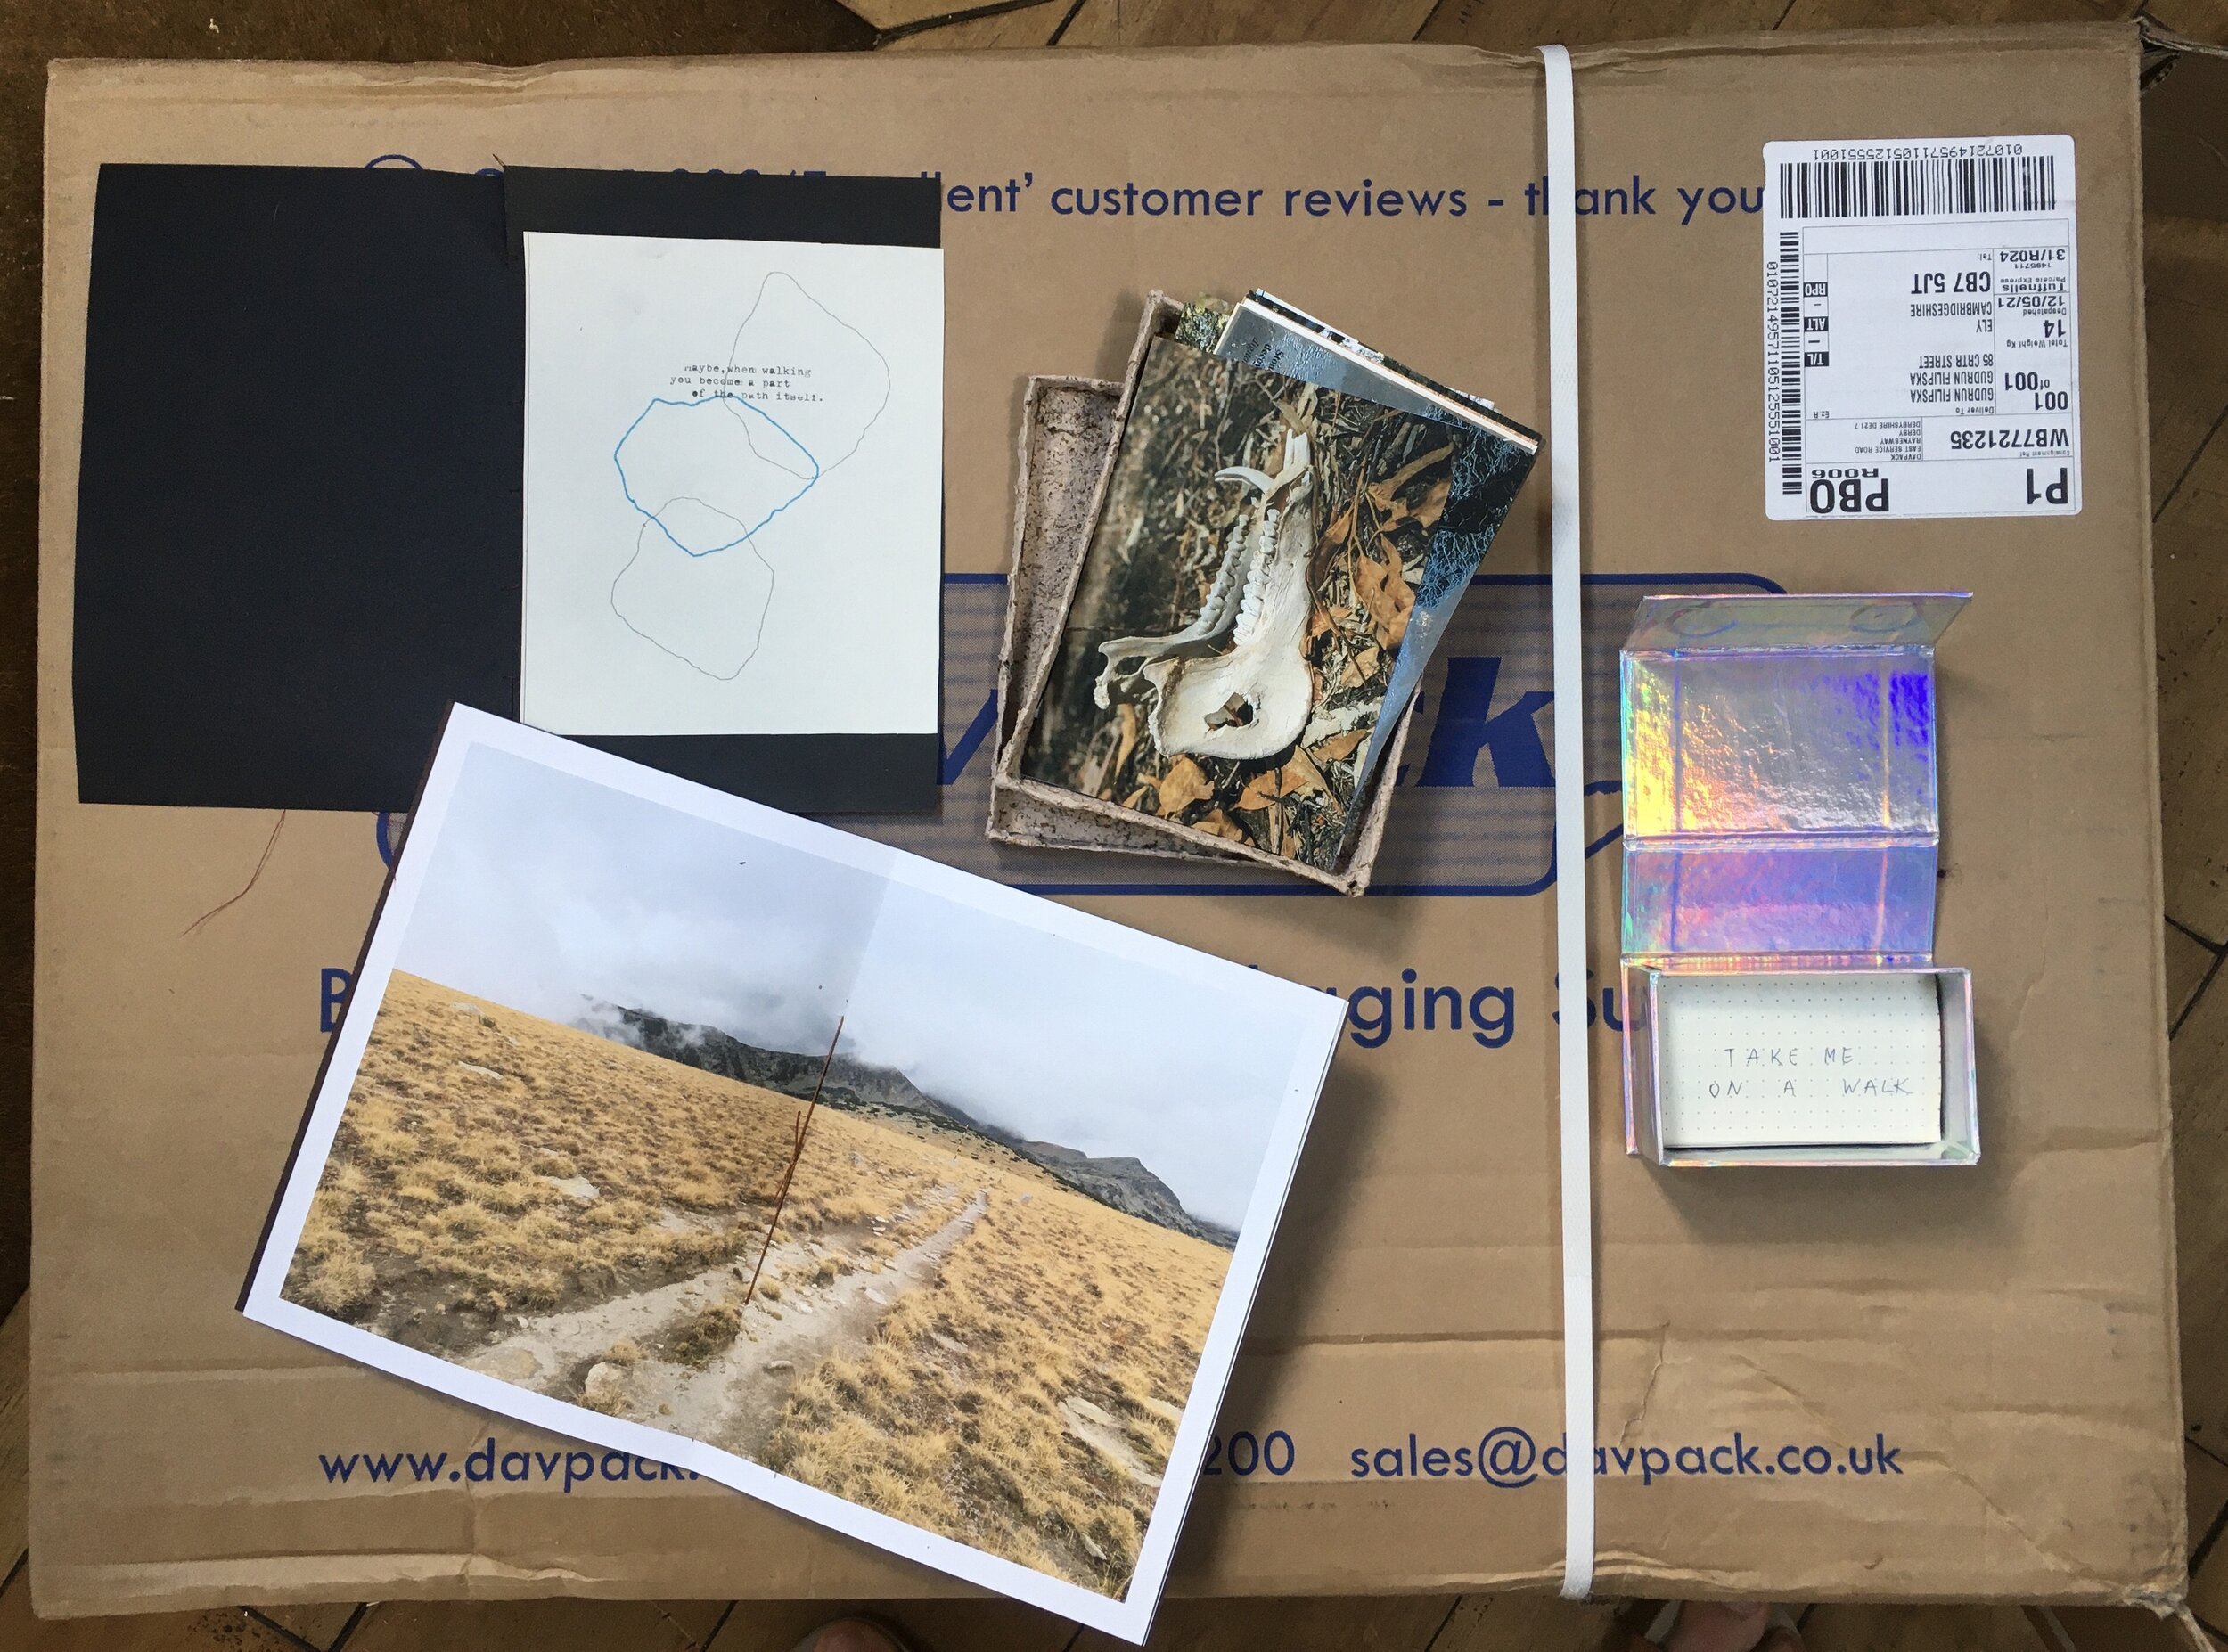 Unboxing at Shelf Gallery! https://theshelfgallery.com/2021/05/22/673/